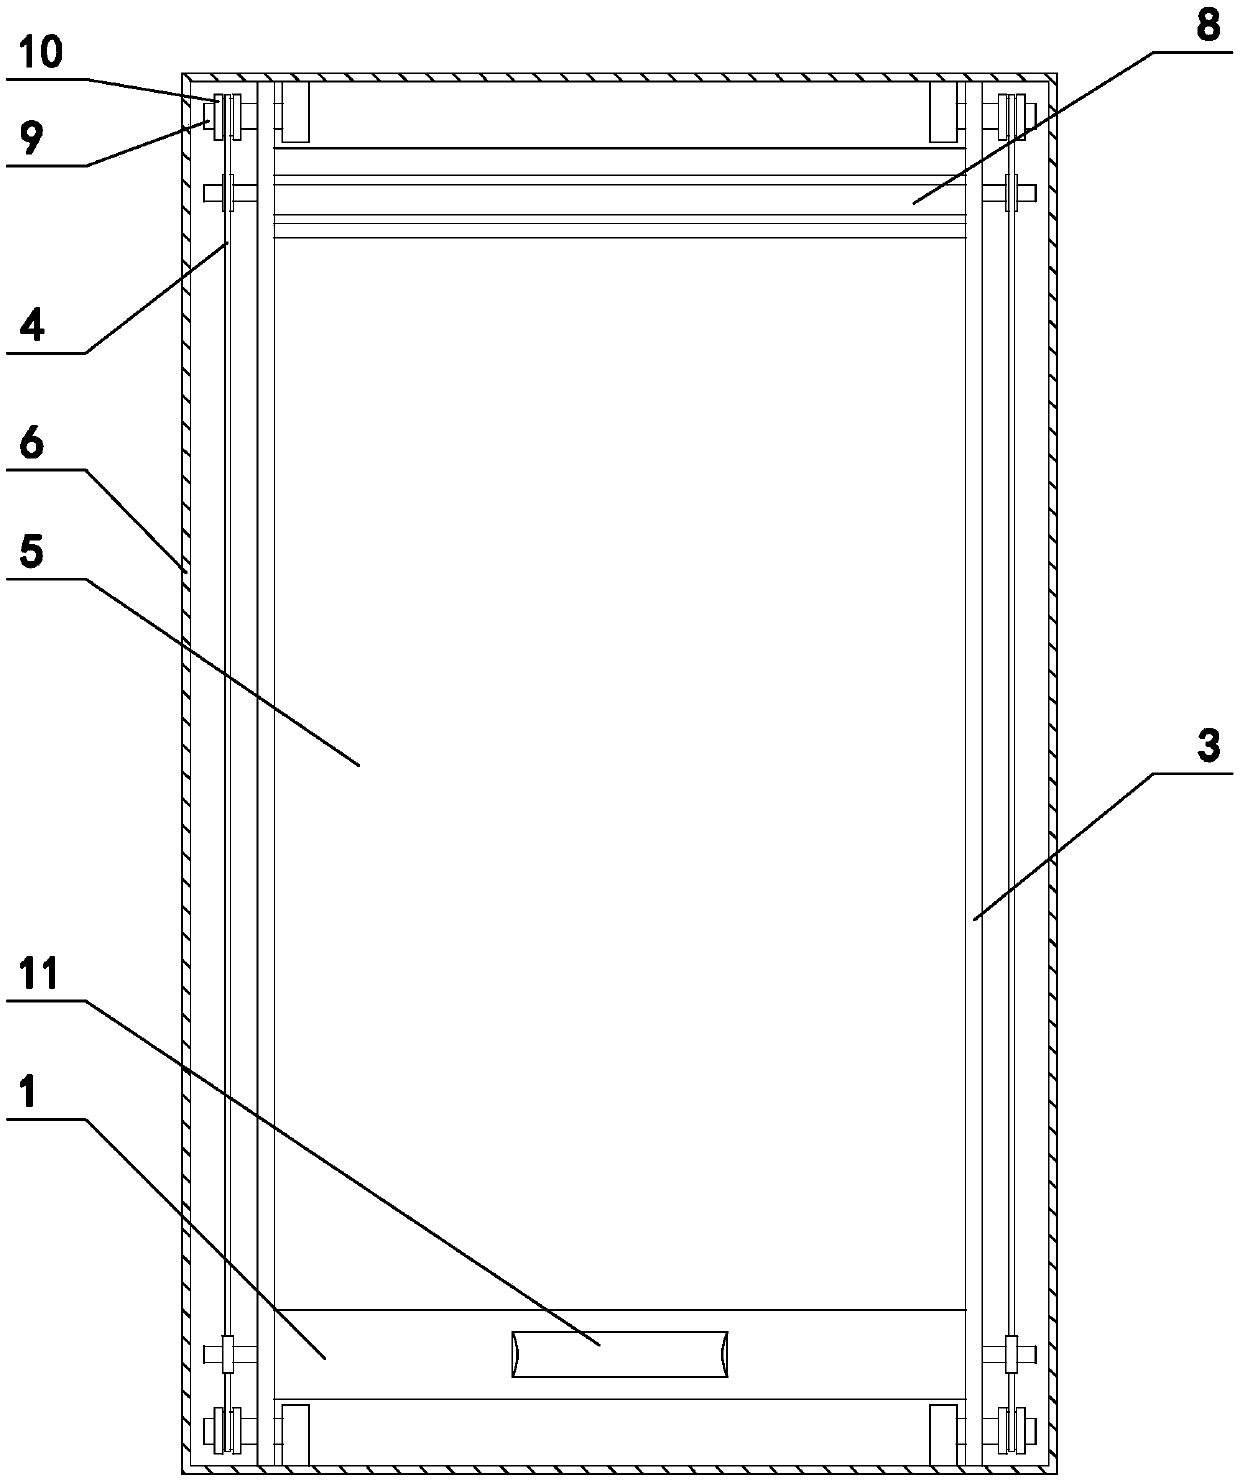 Double-side cleaning mechanism for glass partition wall